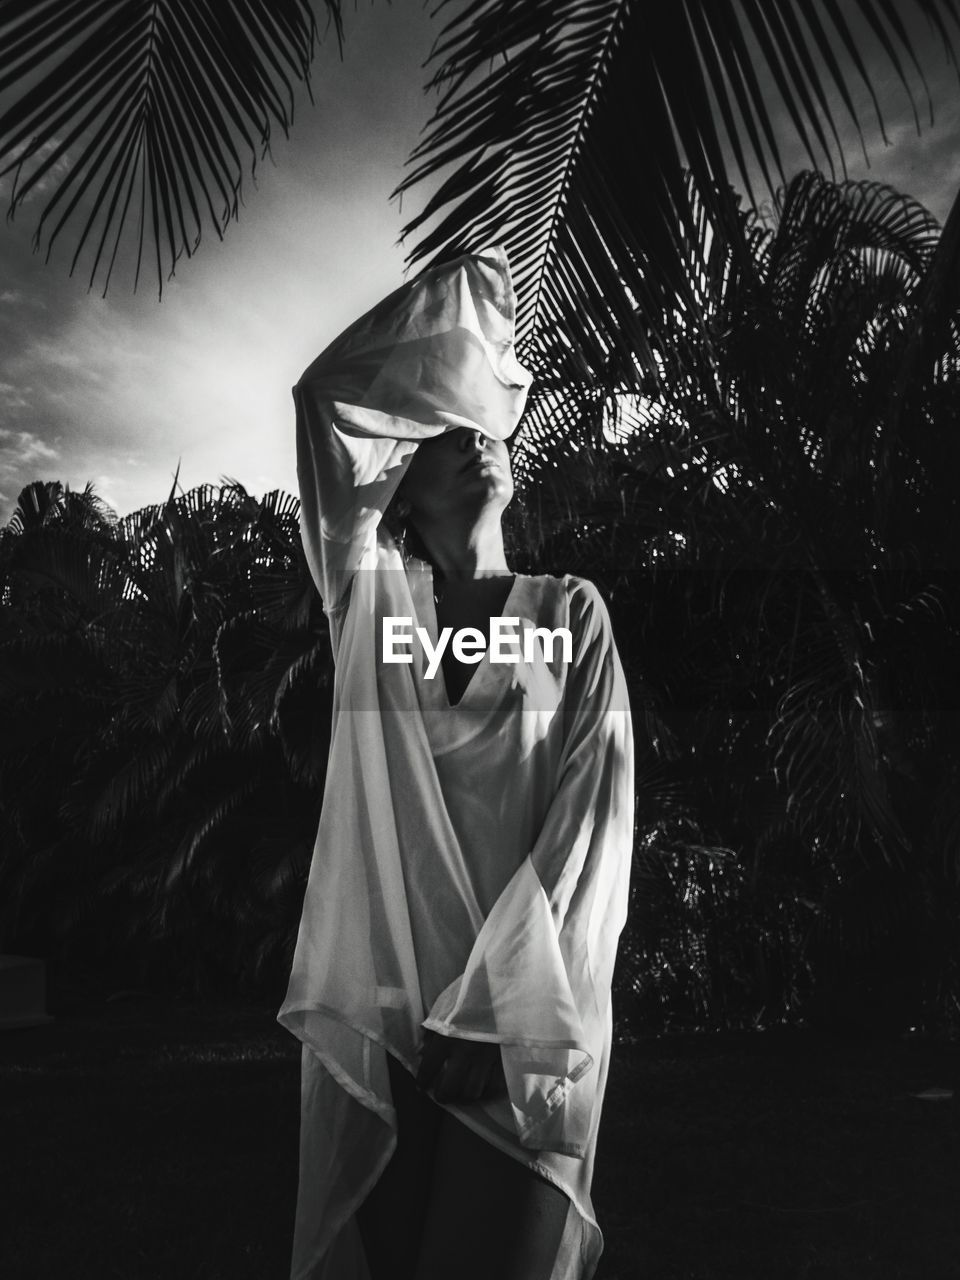 Woman covering eyes while standing by palm trees